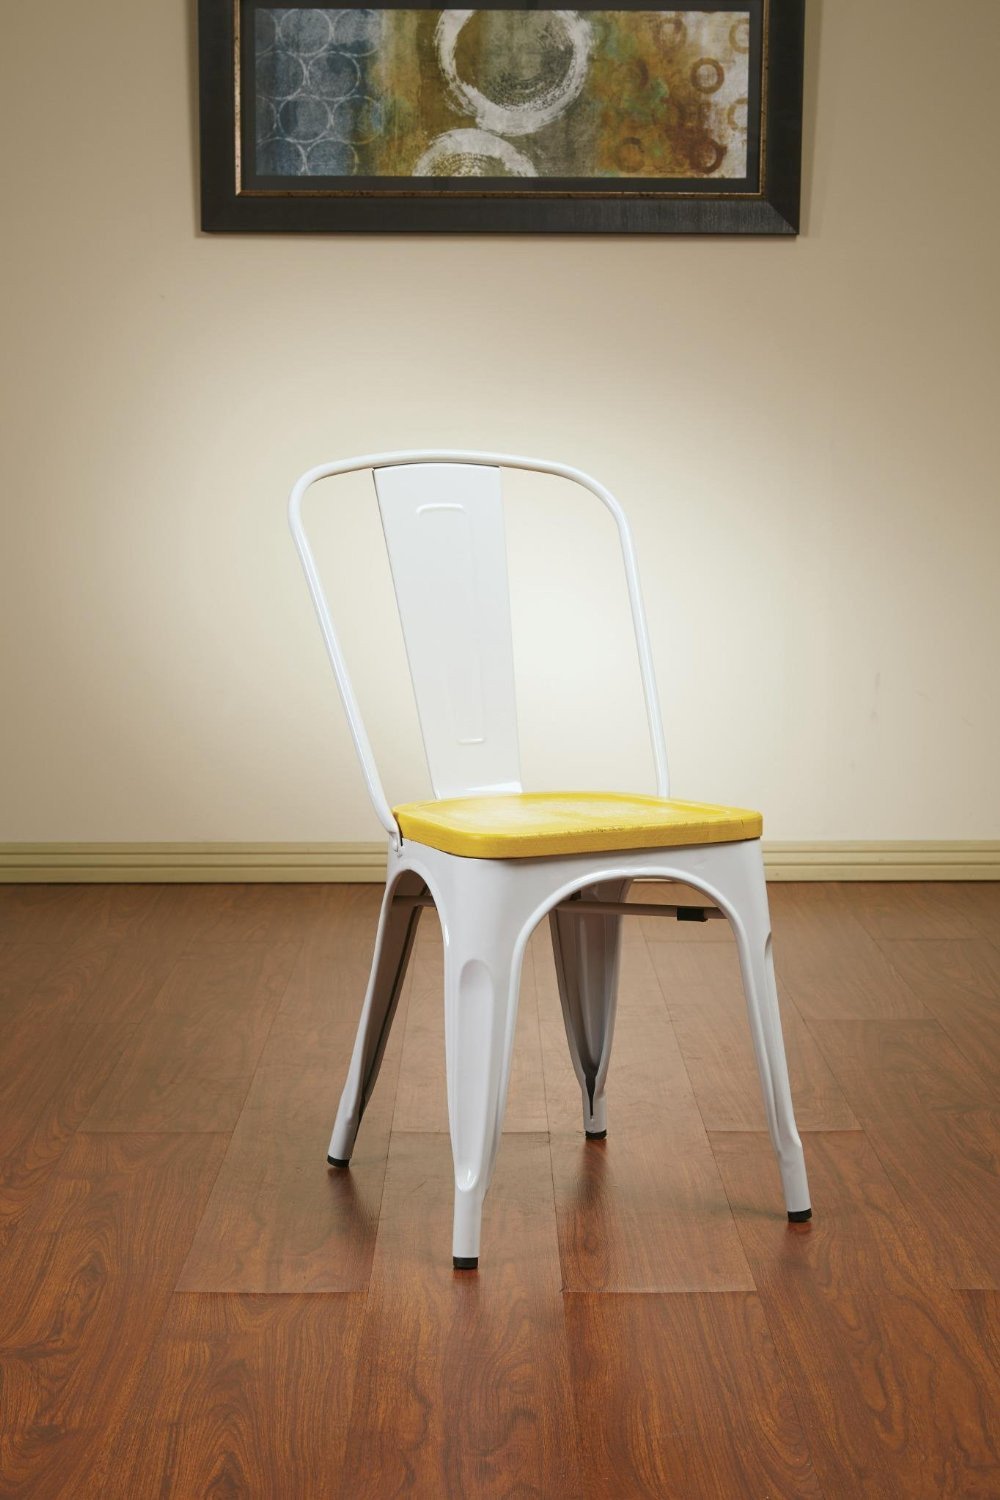 Osp Designs Brw2911a4-c308 Bristow Metal Chair With Vintage Wood Seat, White Finish Frame & Ash Yellowstone Finish Seat